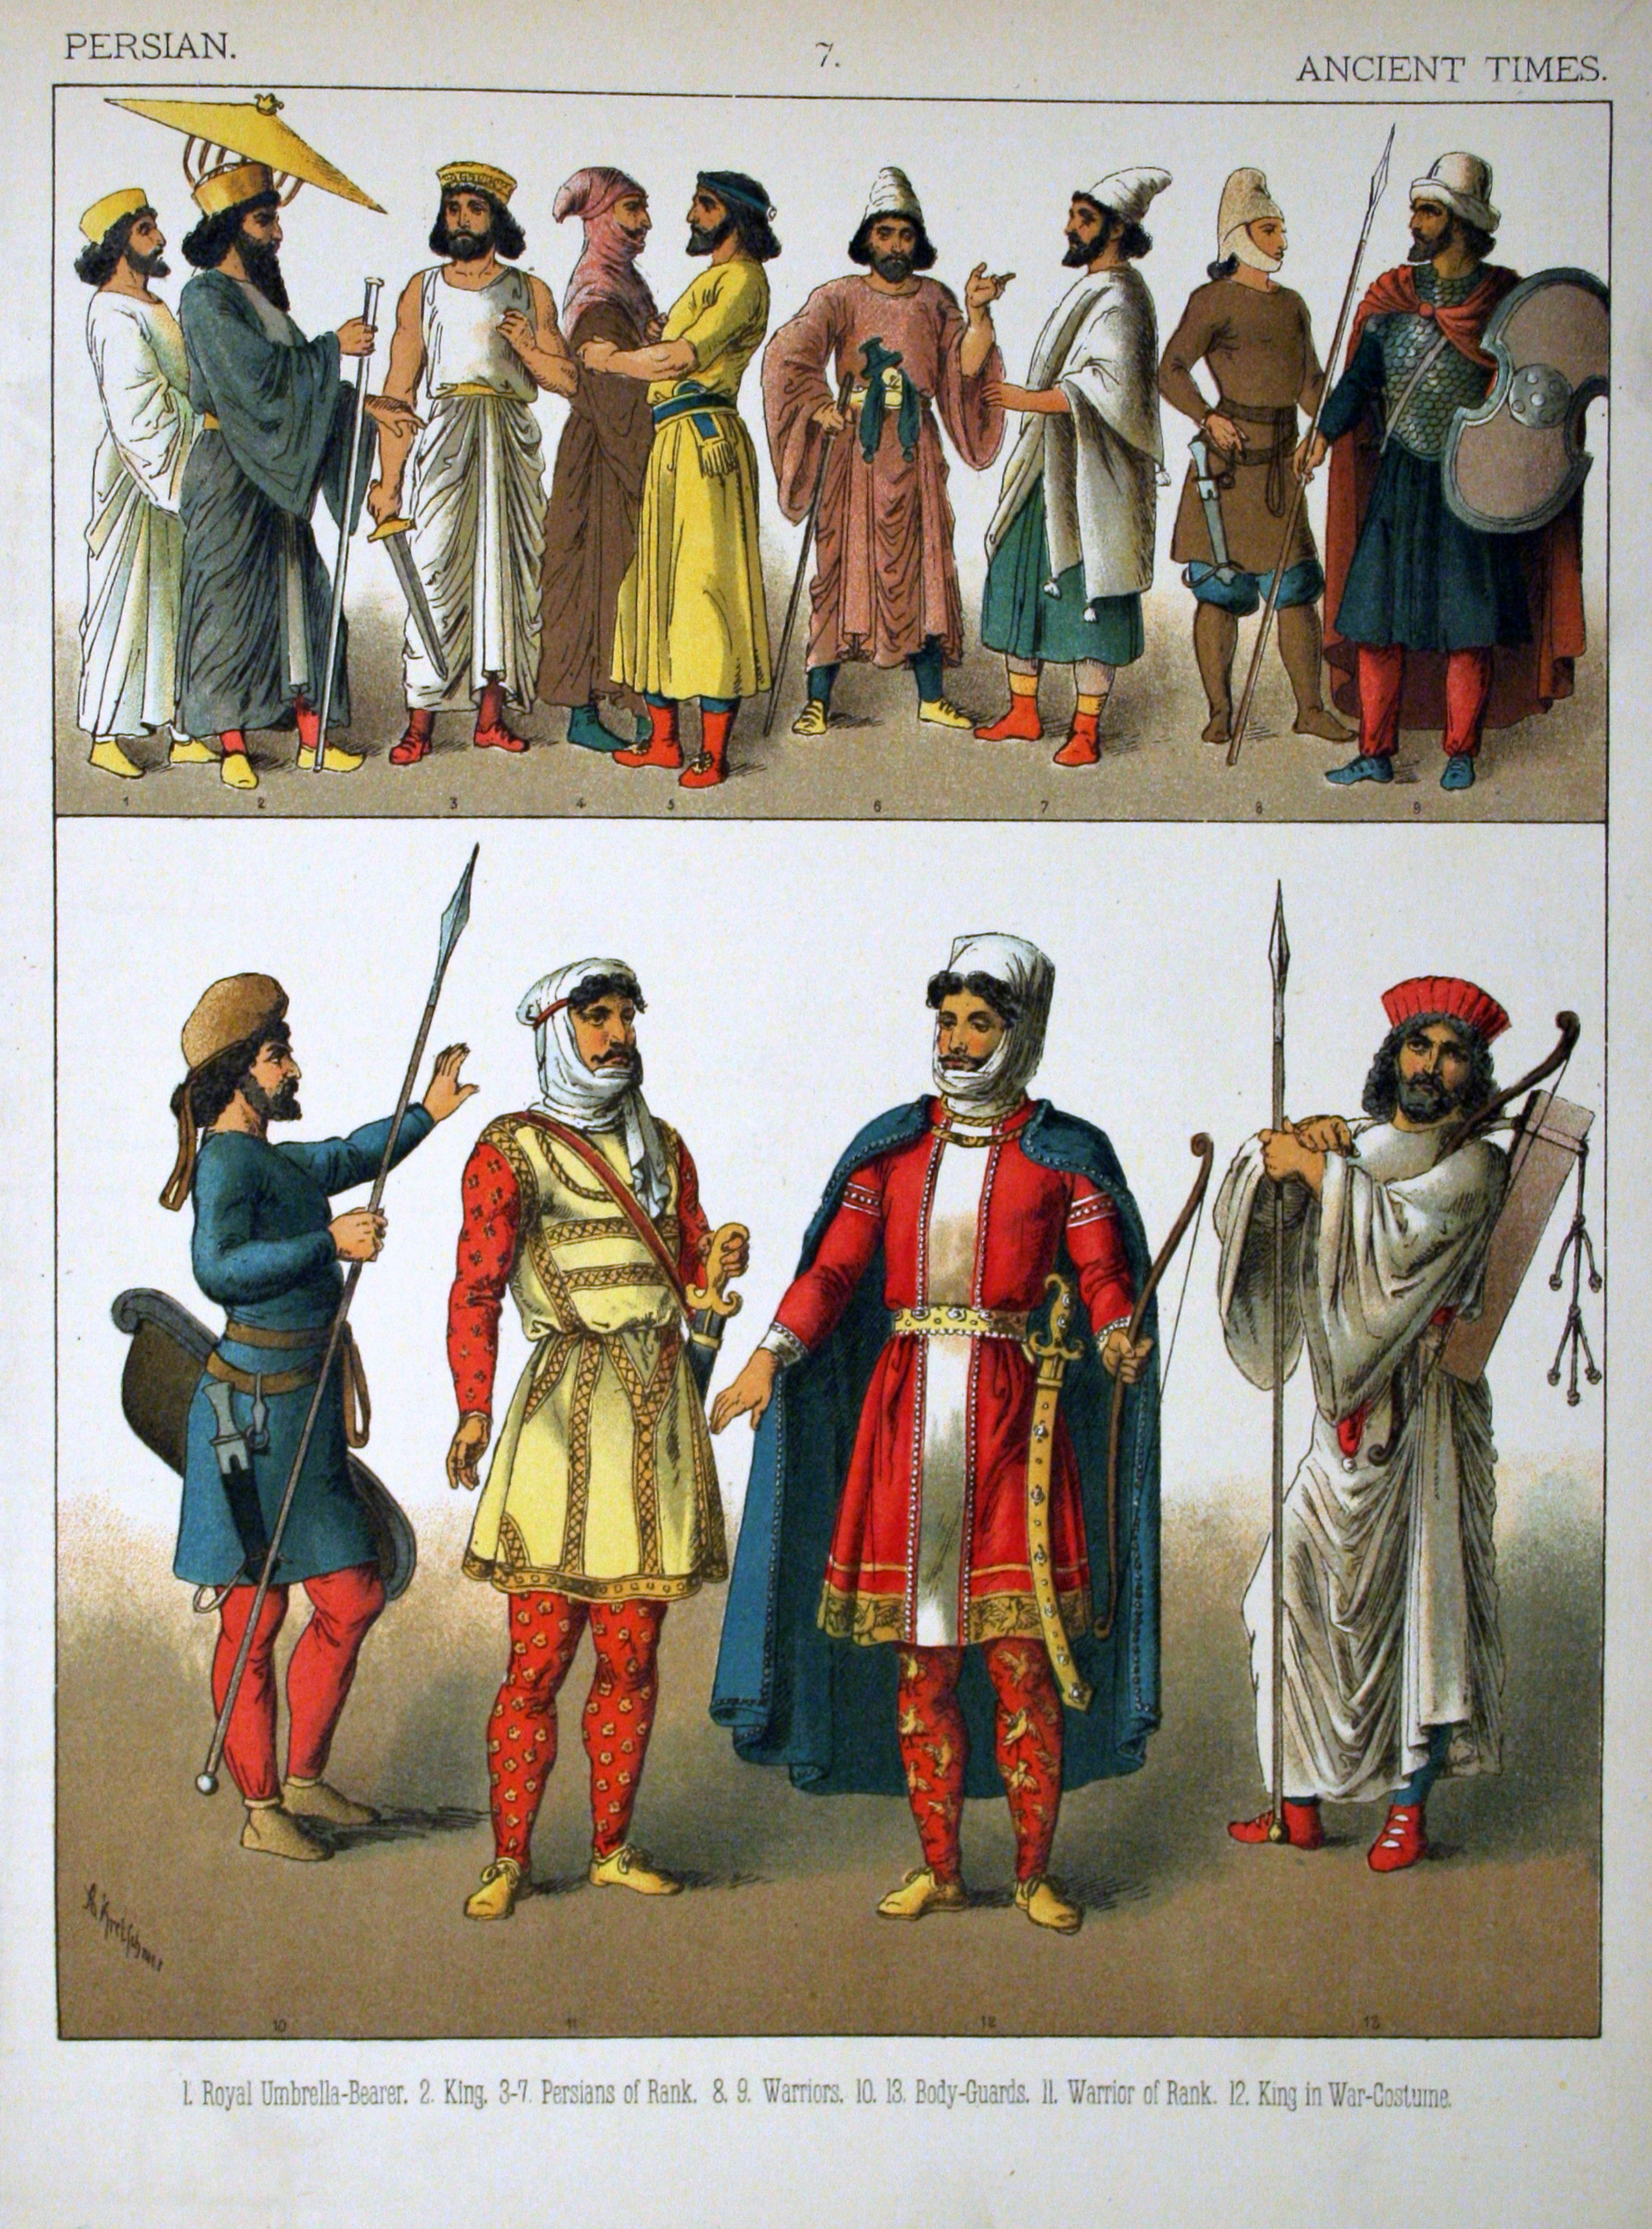 Ancient_Times,_Persian._-_007_-_Costumes_of_All_Nations_(1882).jpg